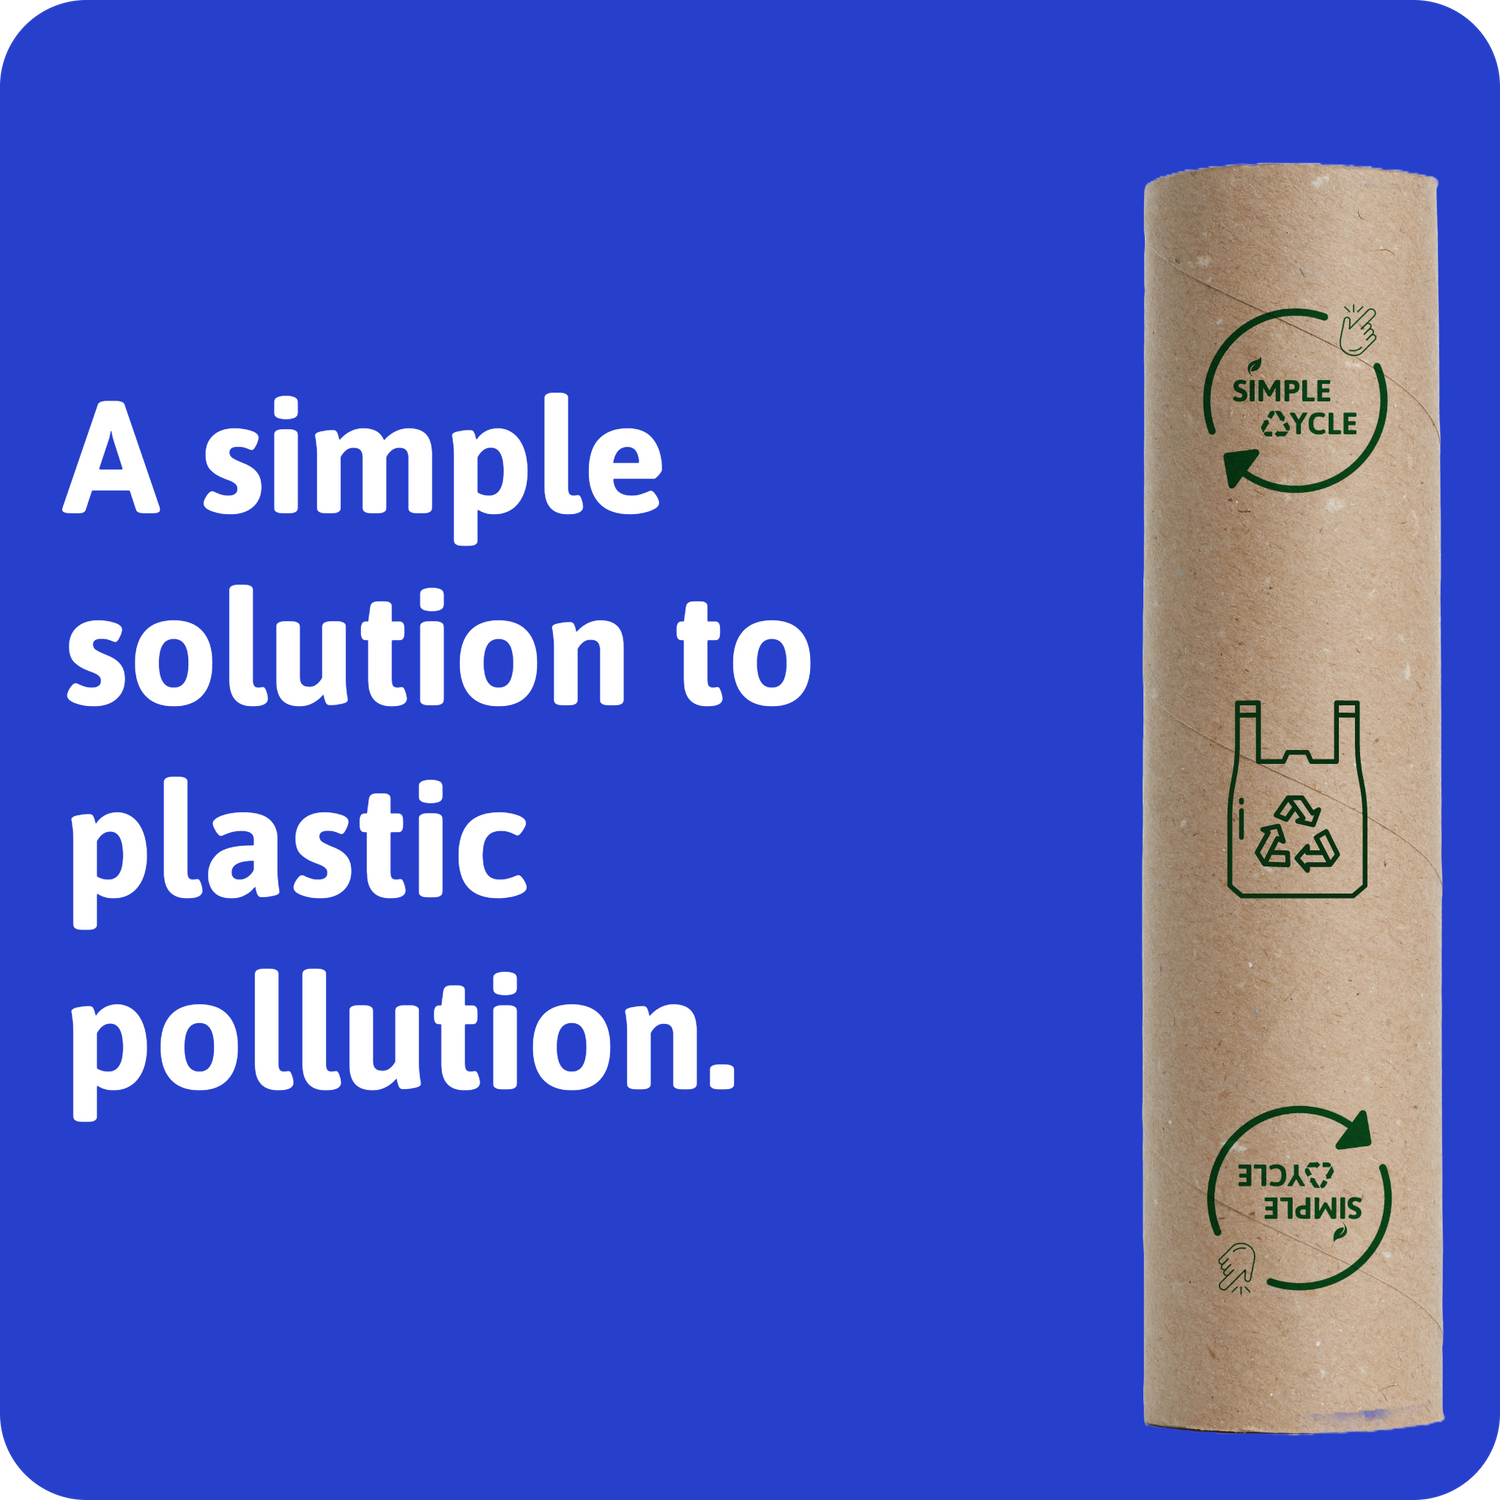 A simple solution to plastic pollution is the text on the image. Blue background with white text. Cardboard recycling tube on the right.